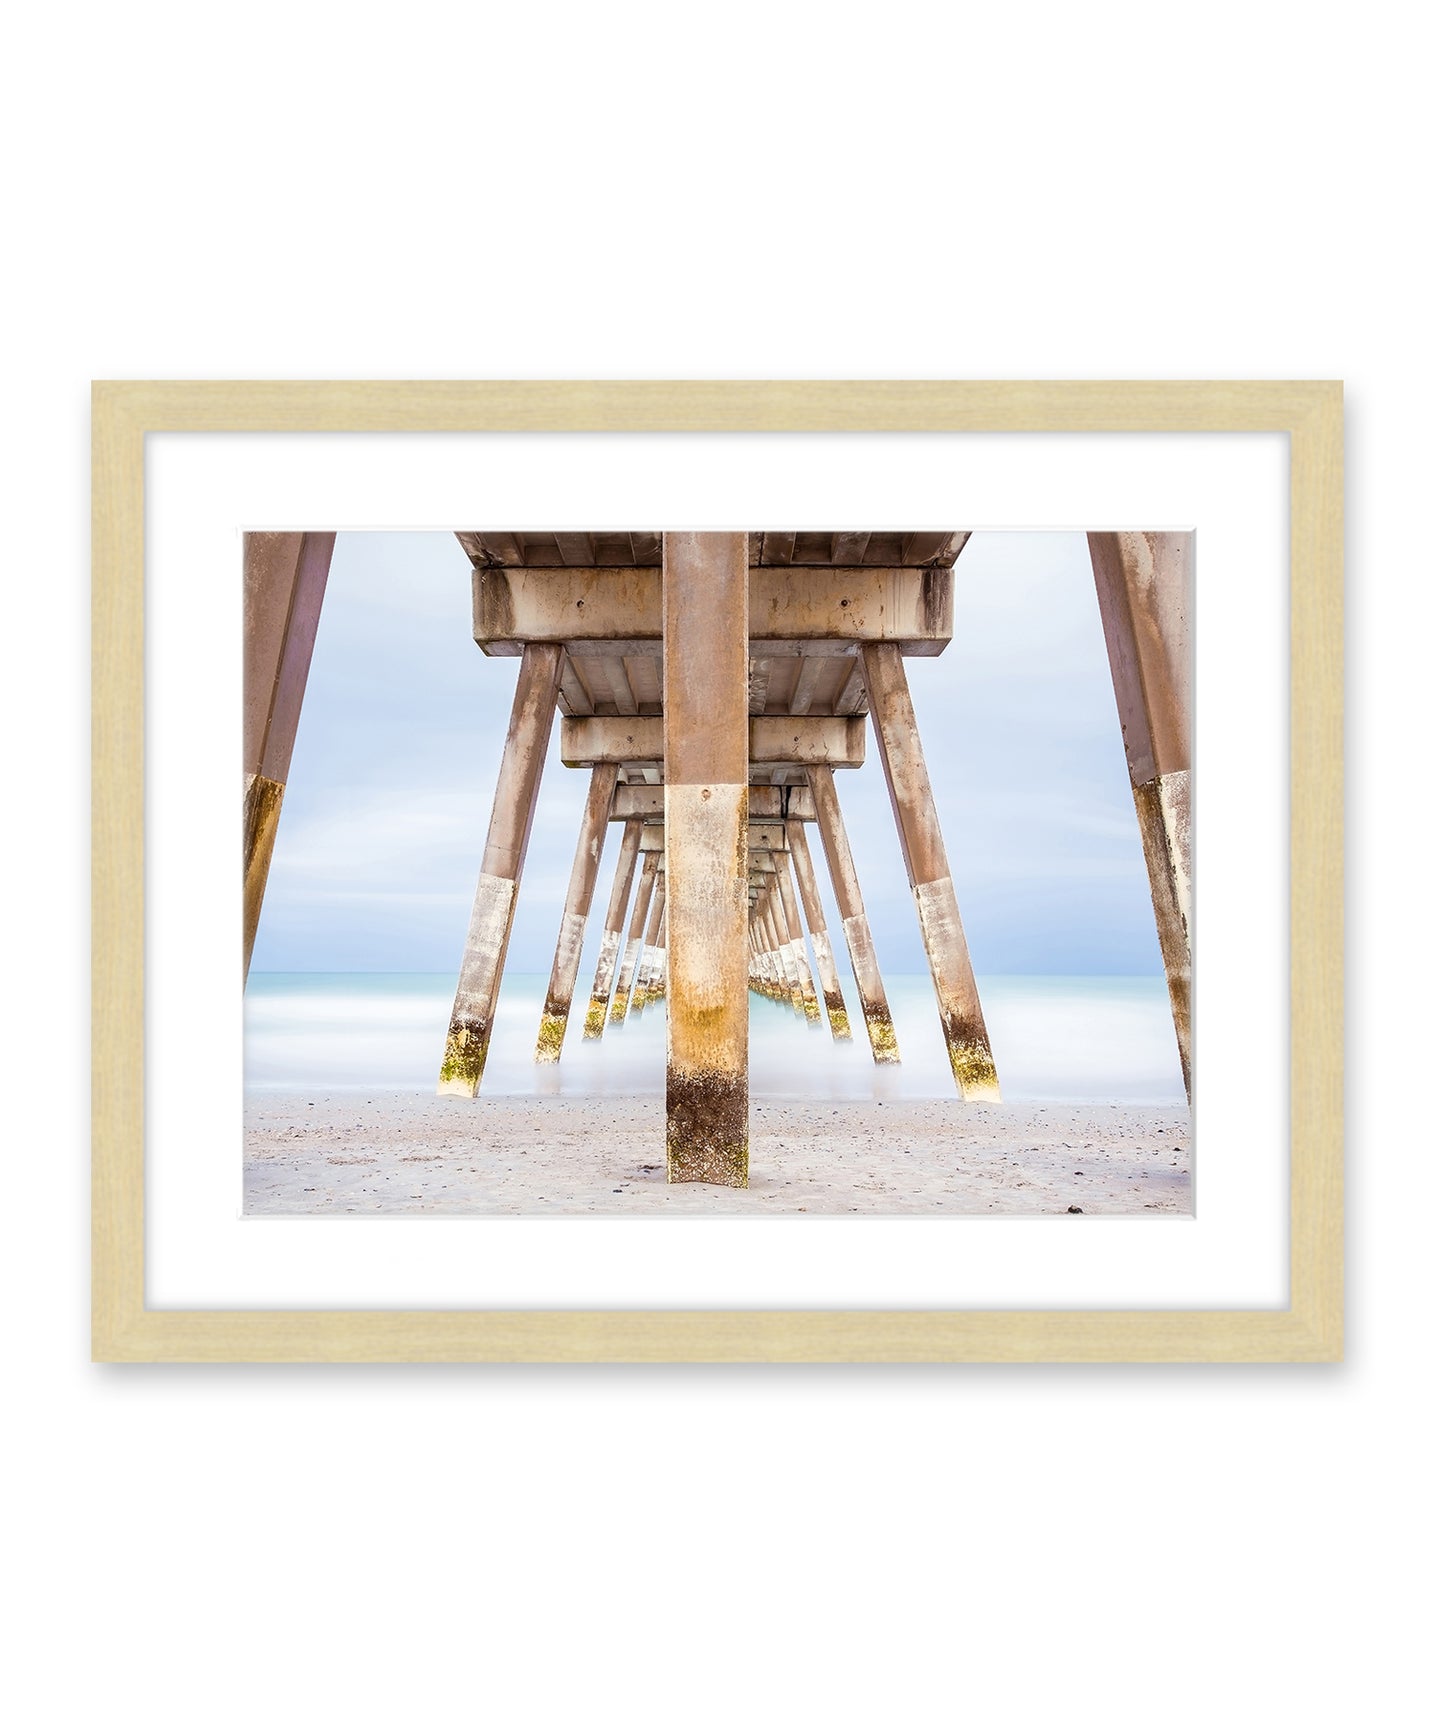 blue Johnny mercer pier wrightsville beach photograph, natural wood frame, by Wright and Roam